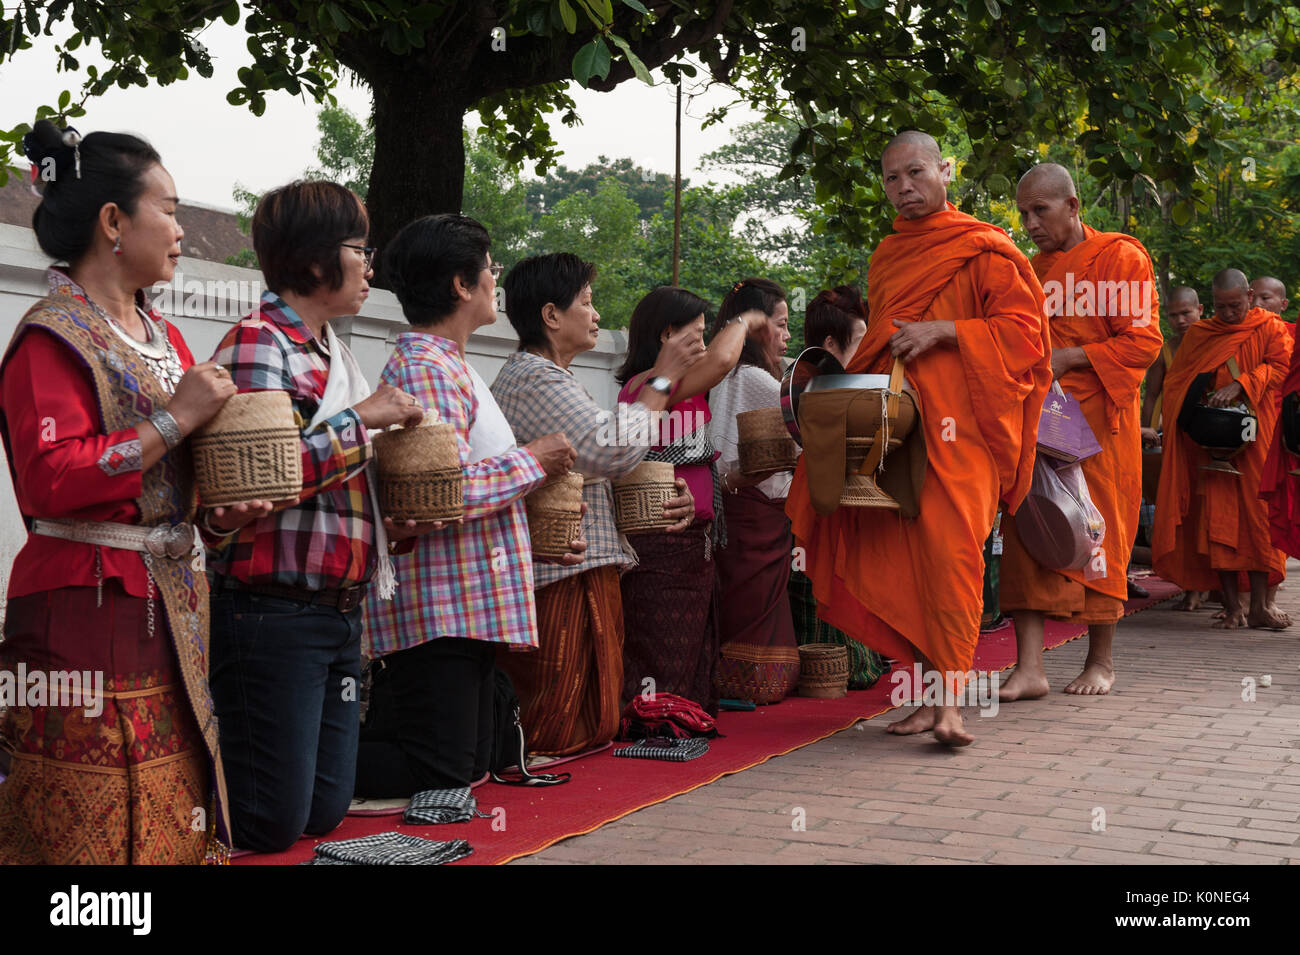 The saffron-clad monks walk along the main street of Luang Prabang, Laos, during alms giving ceremony. With over 30 monasteries clustered in the compa Stock Photo